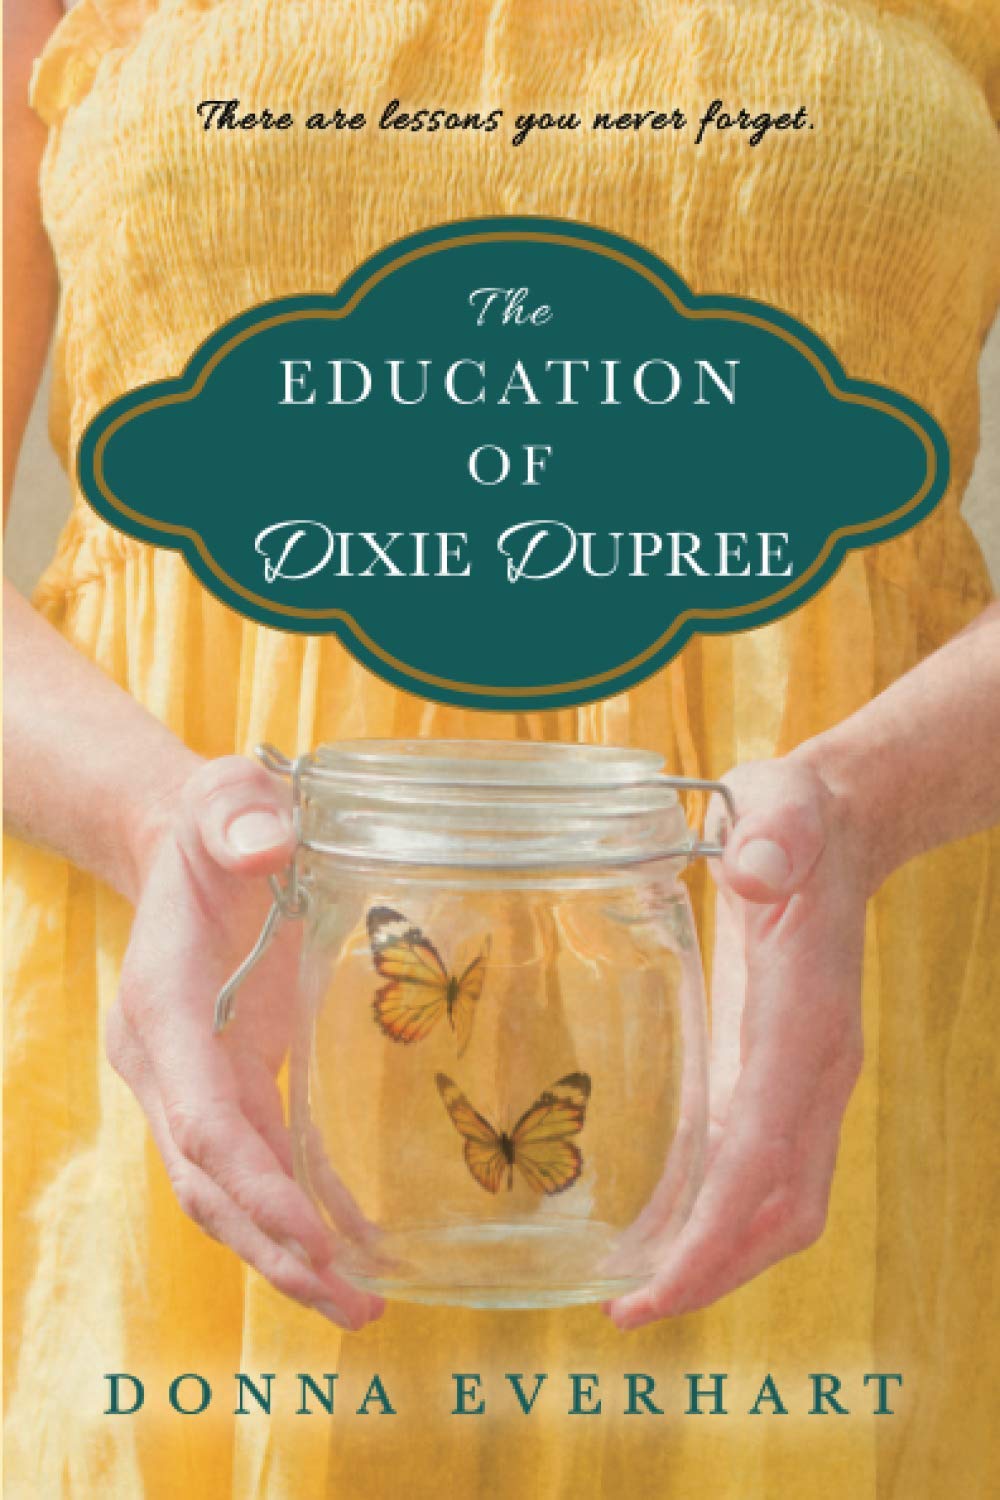 The education of Dixie Dupree